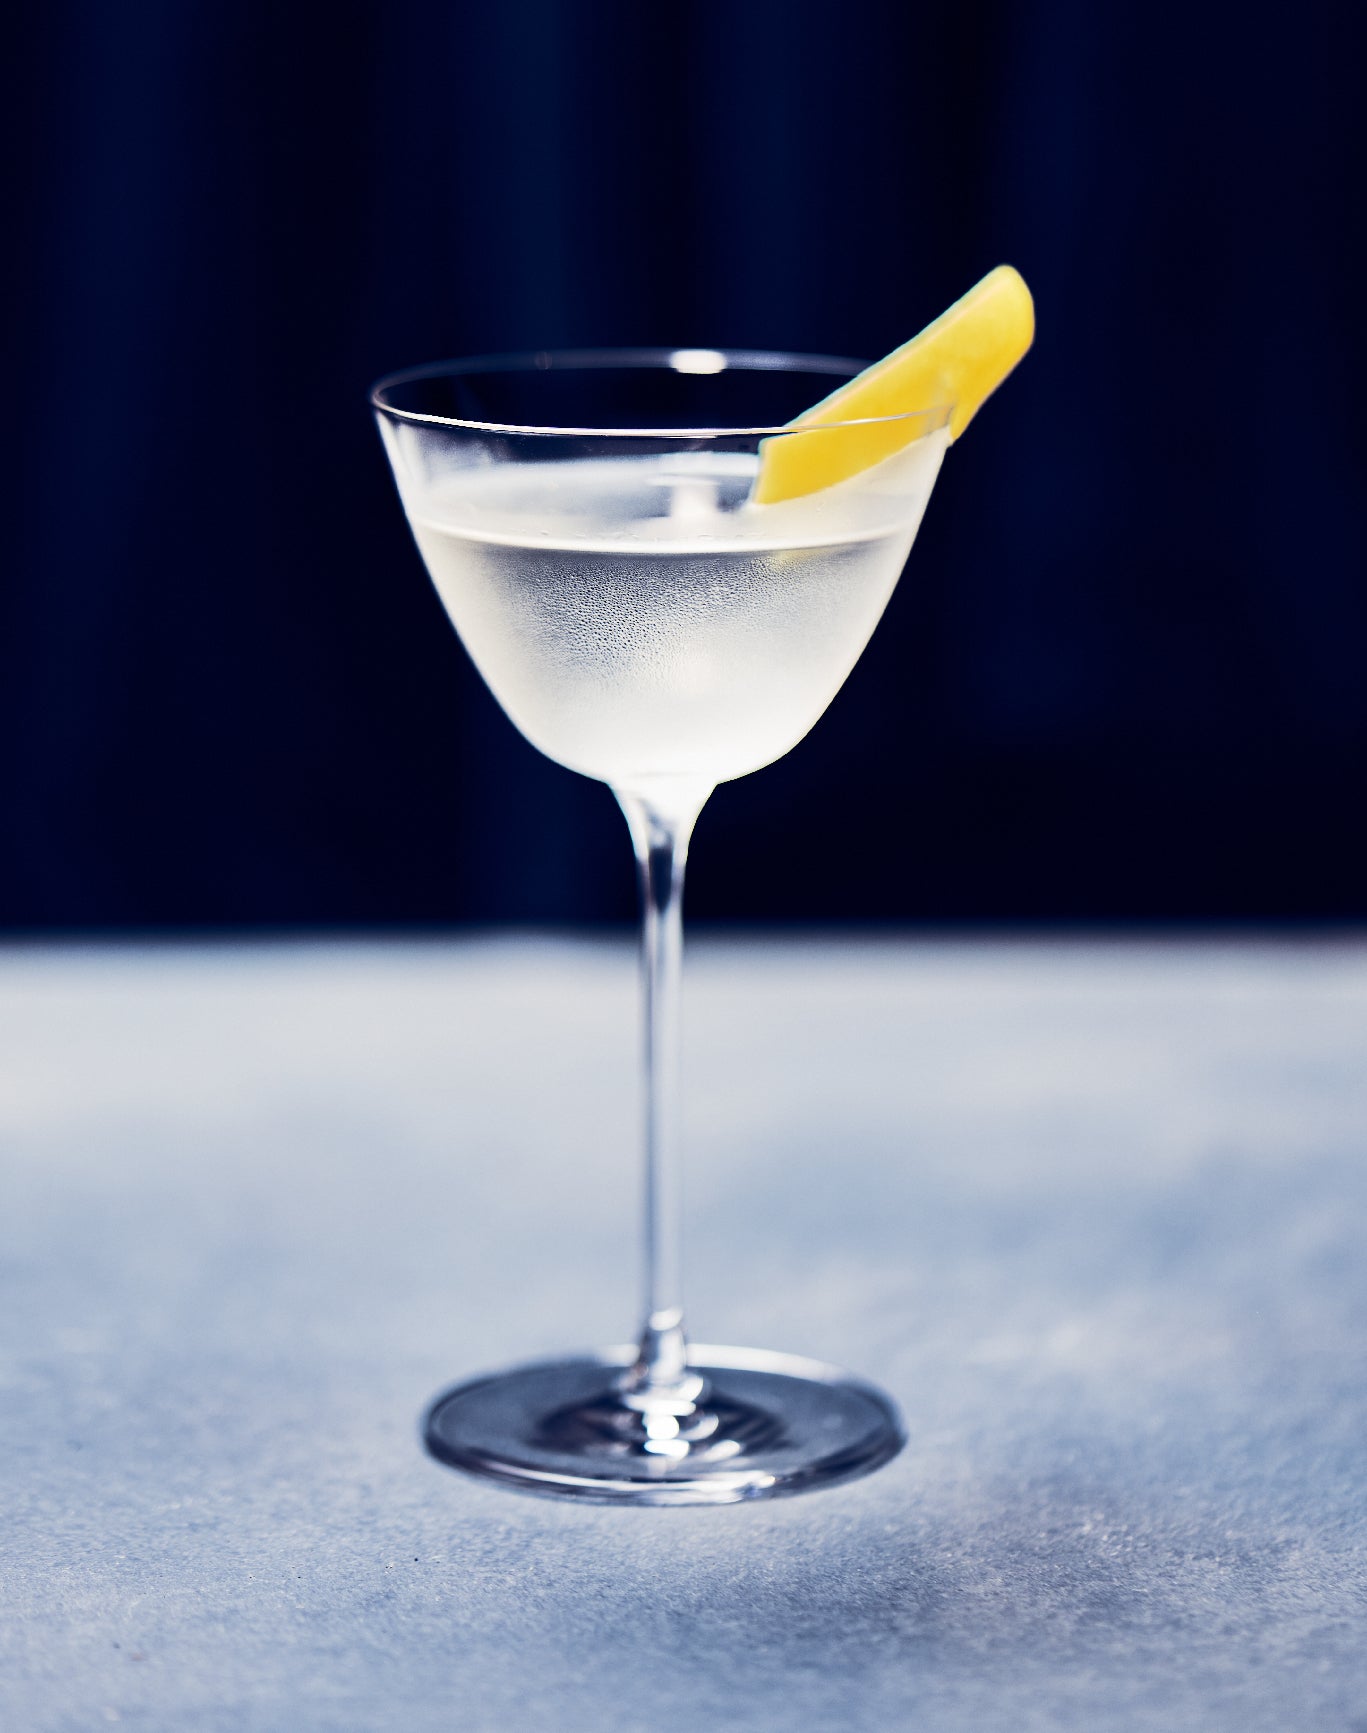 A photo of a Botanisrt cocktail on a blue background